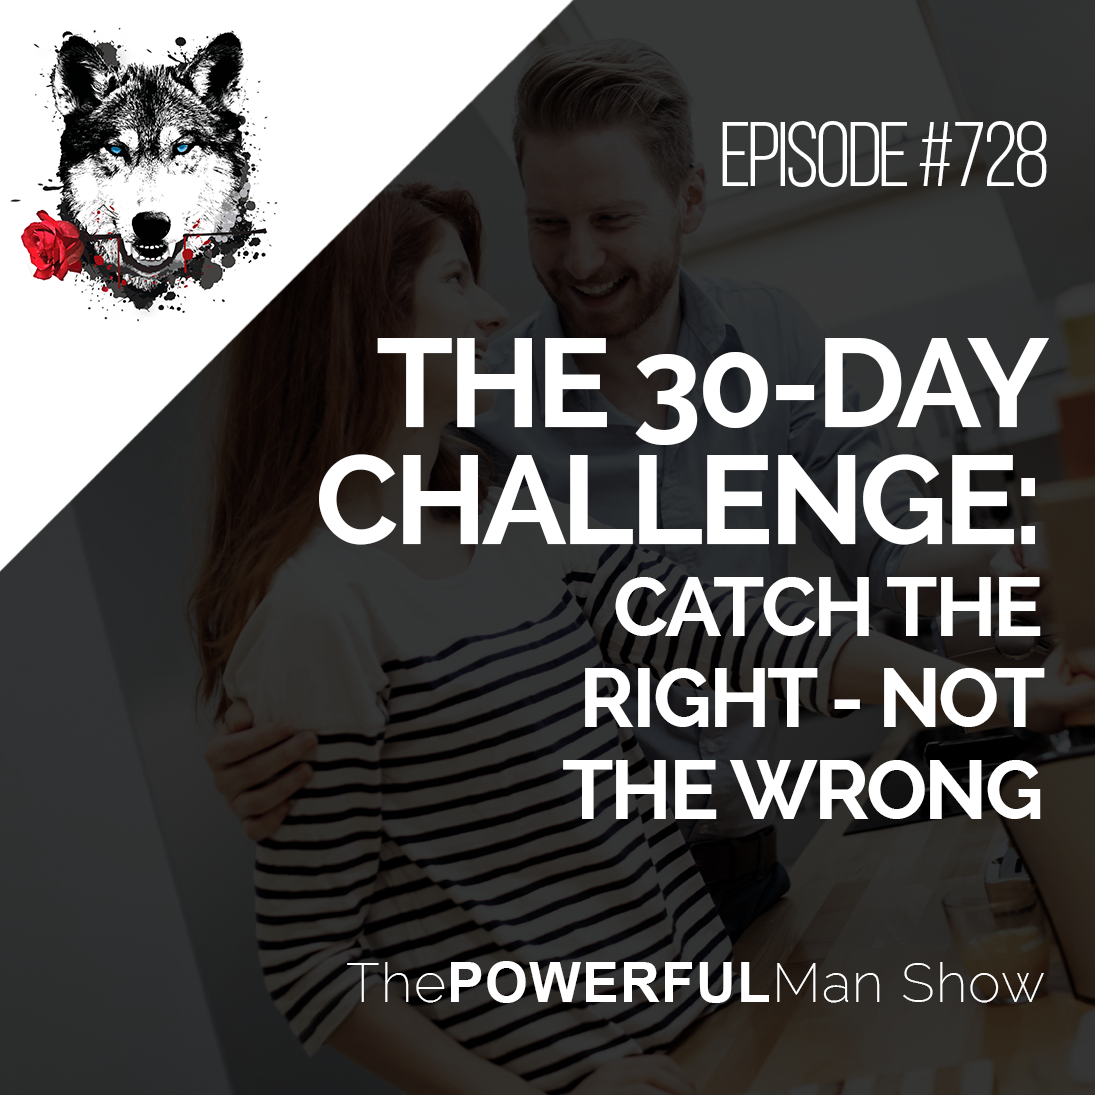 The 30-Day Challenge: Catch The Right - Not The Wrong